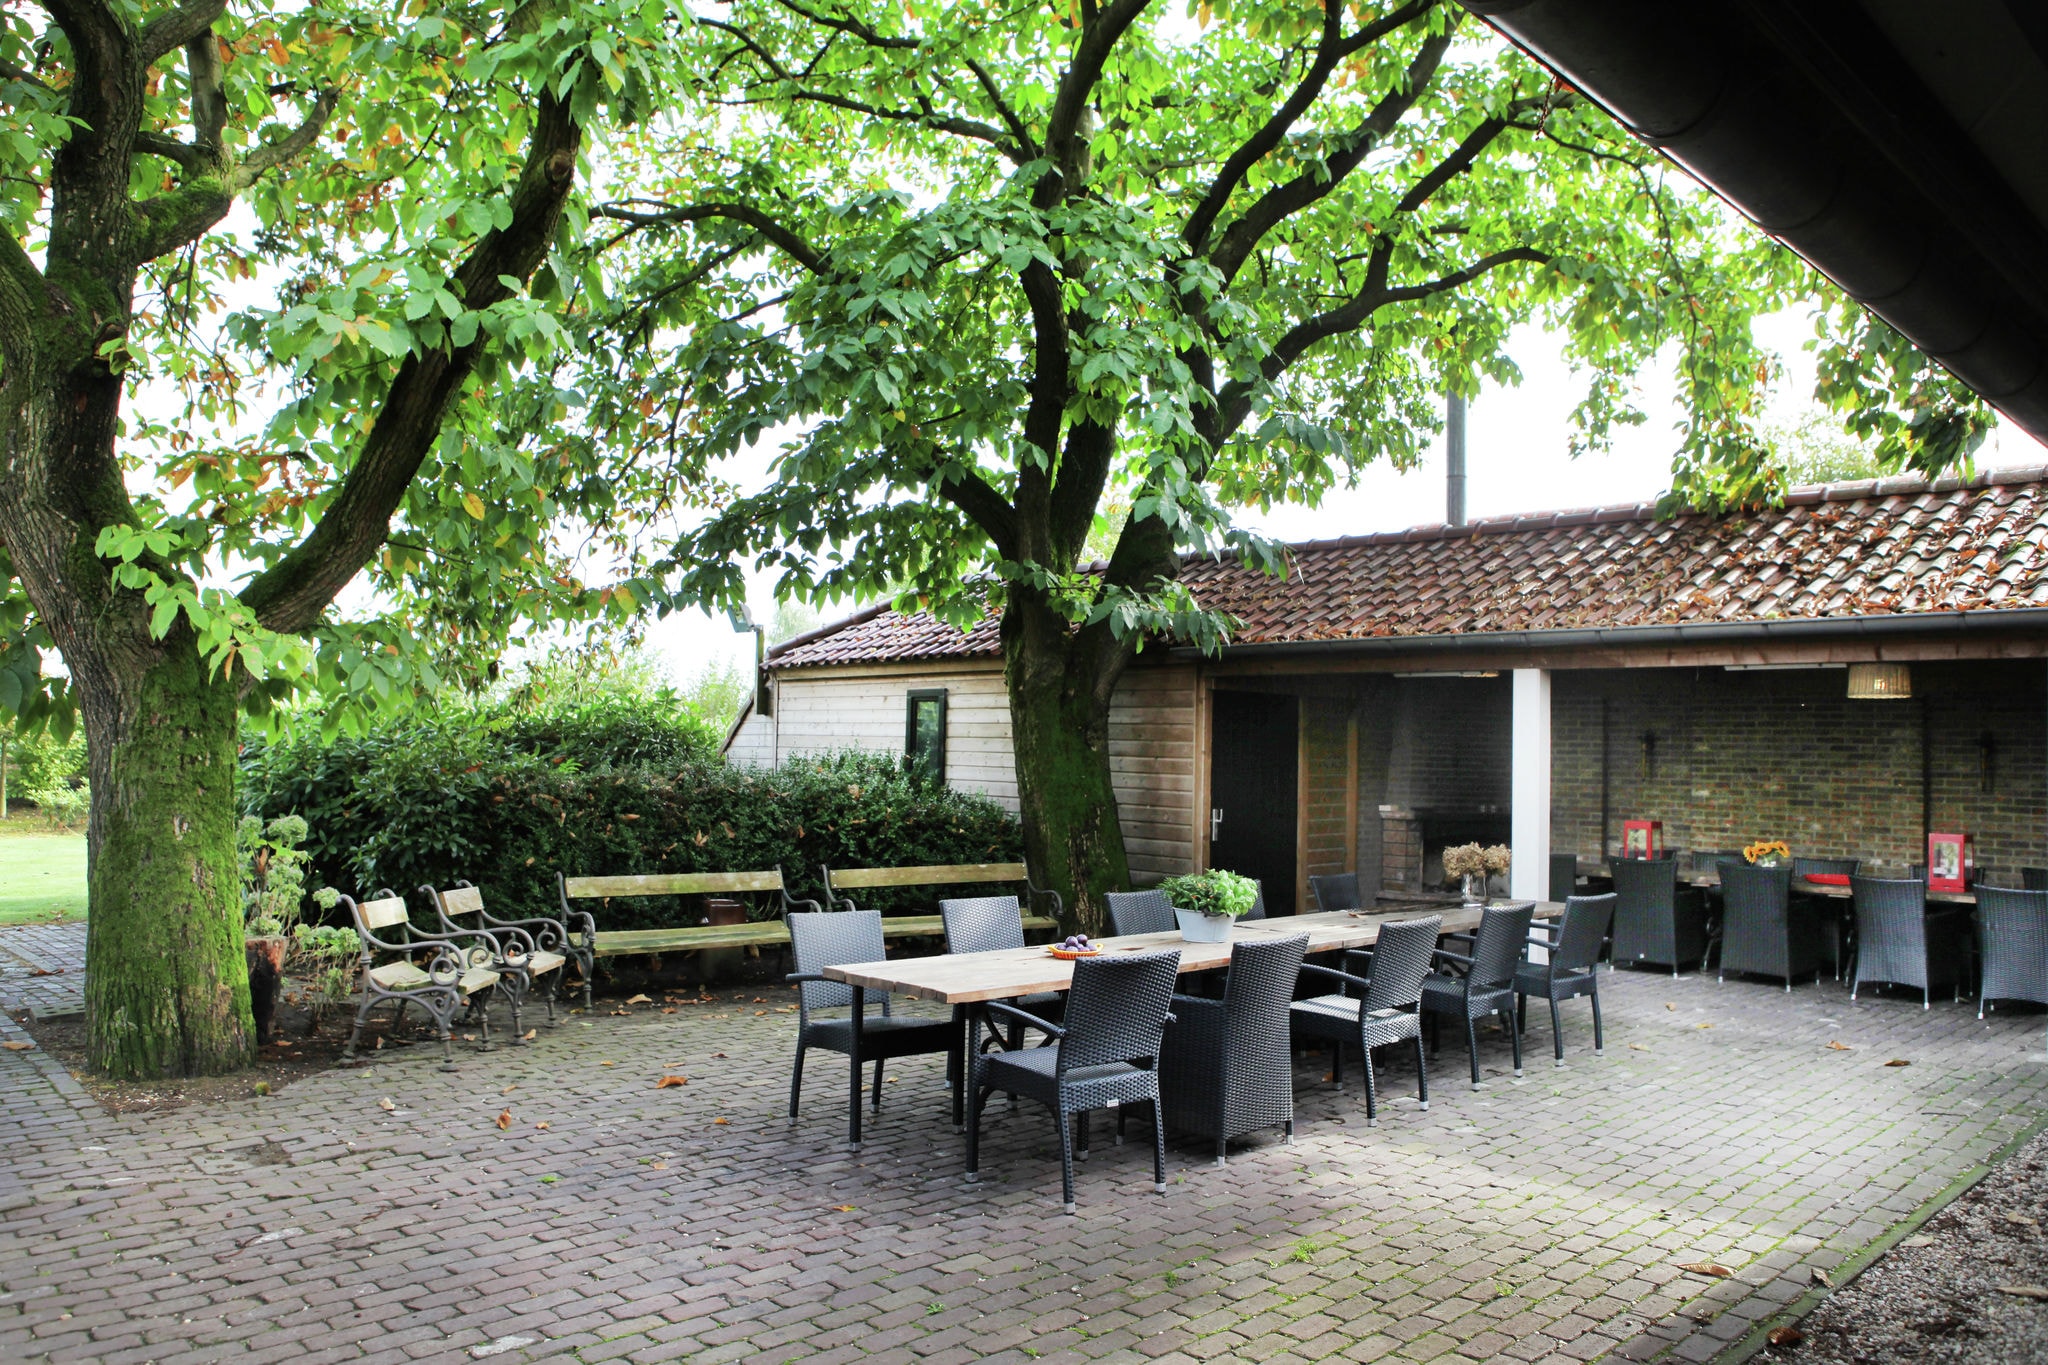 Atmospheric country house in Asten on a golf course